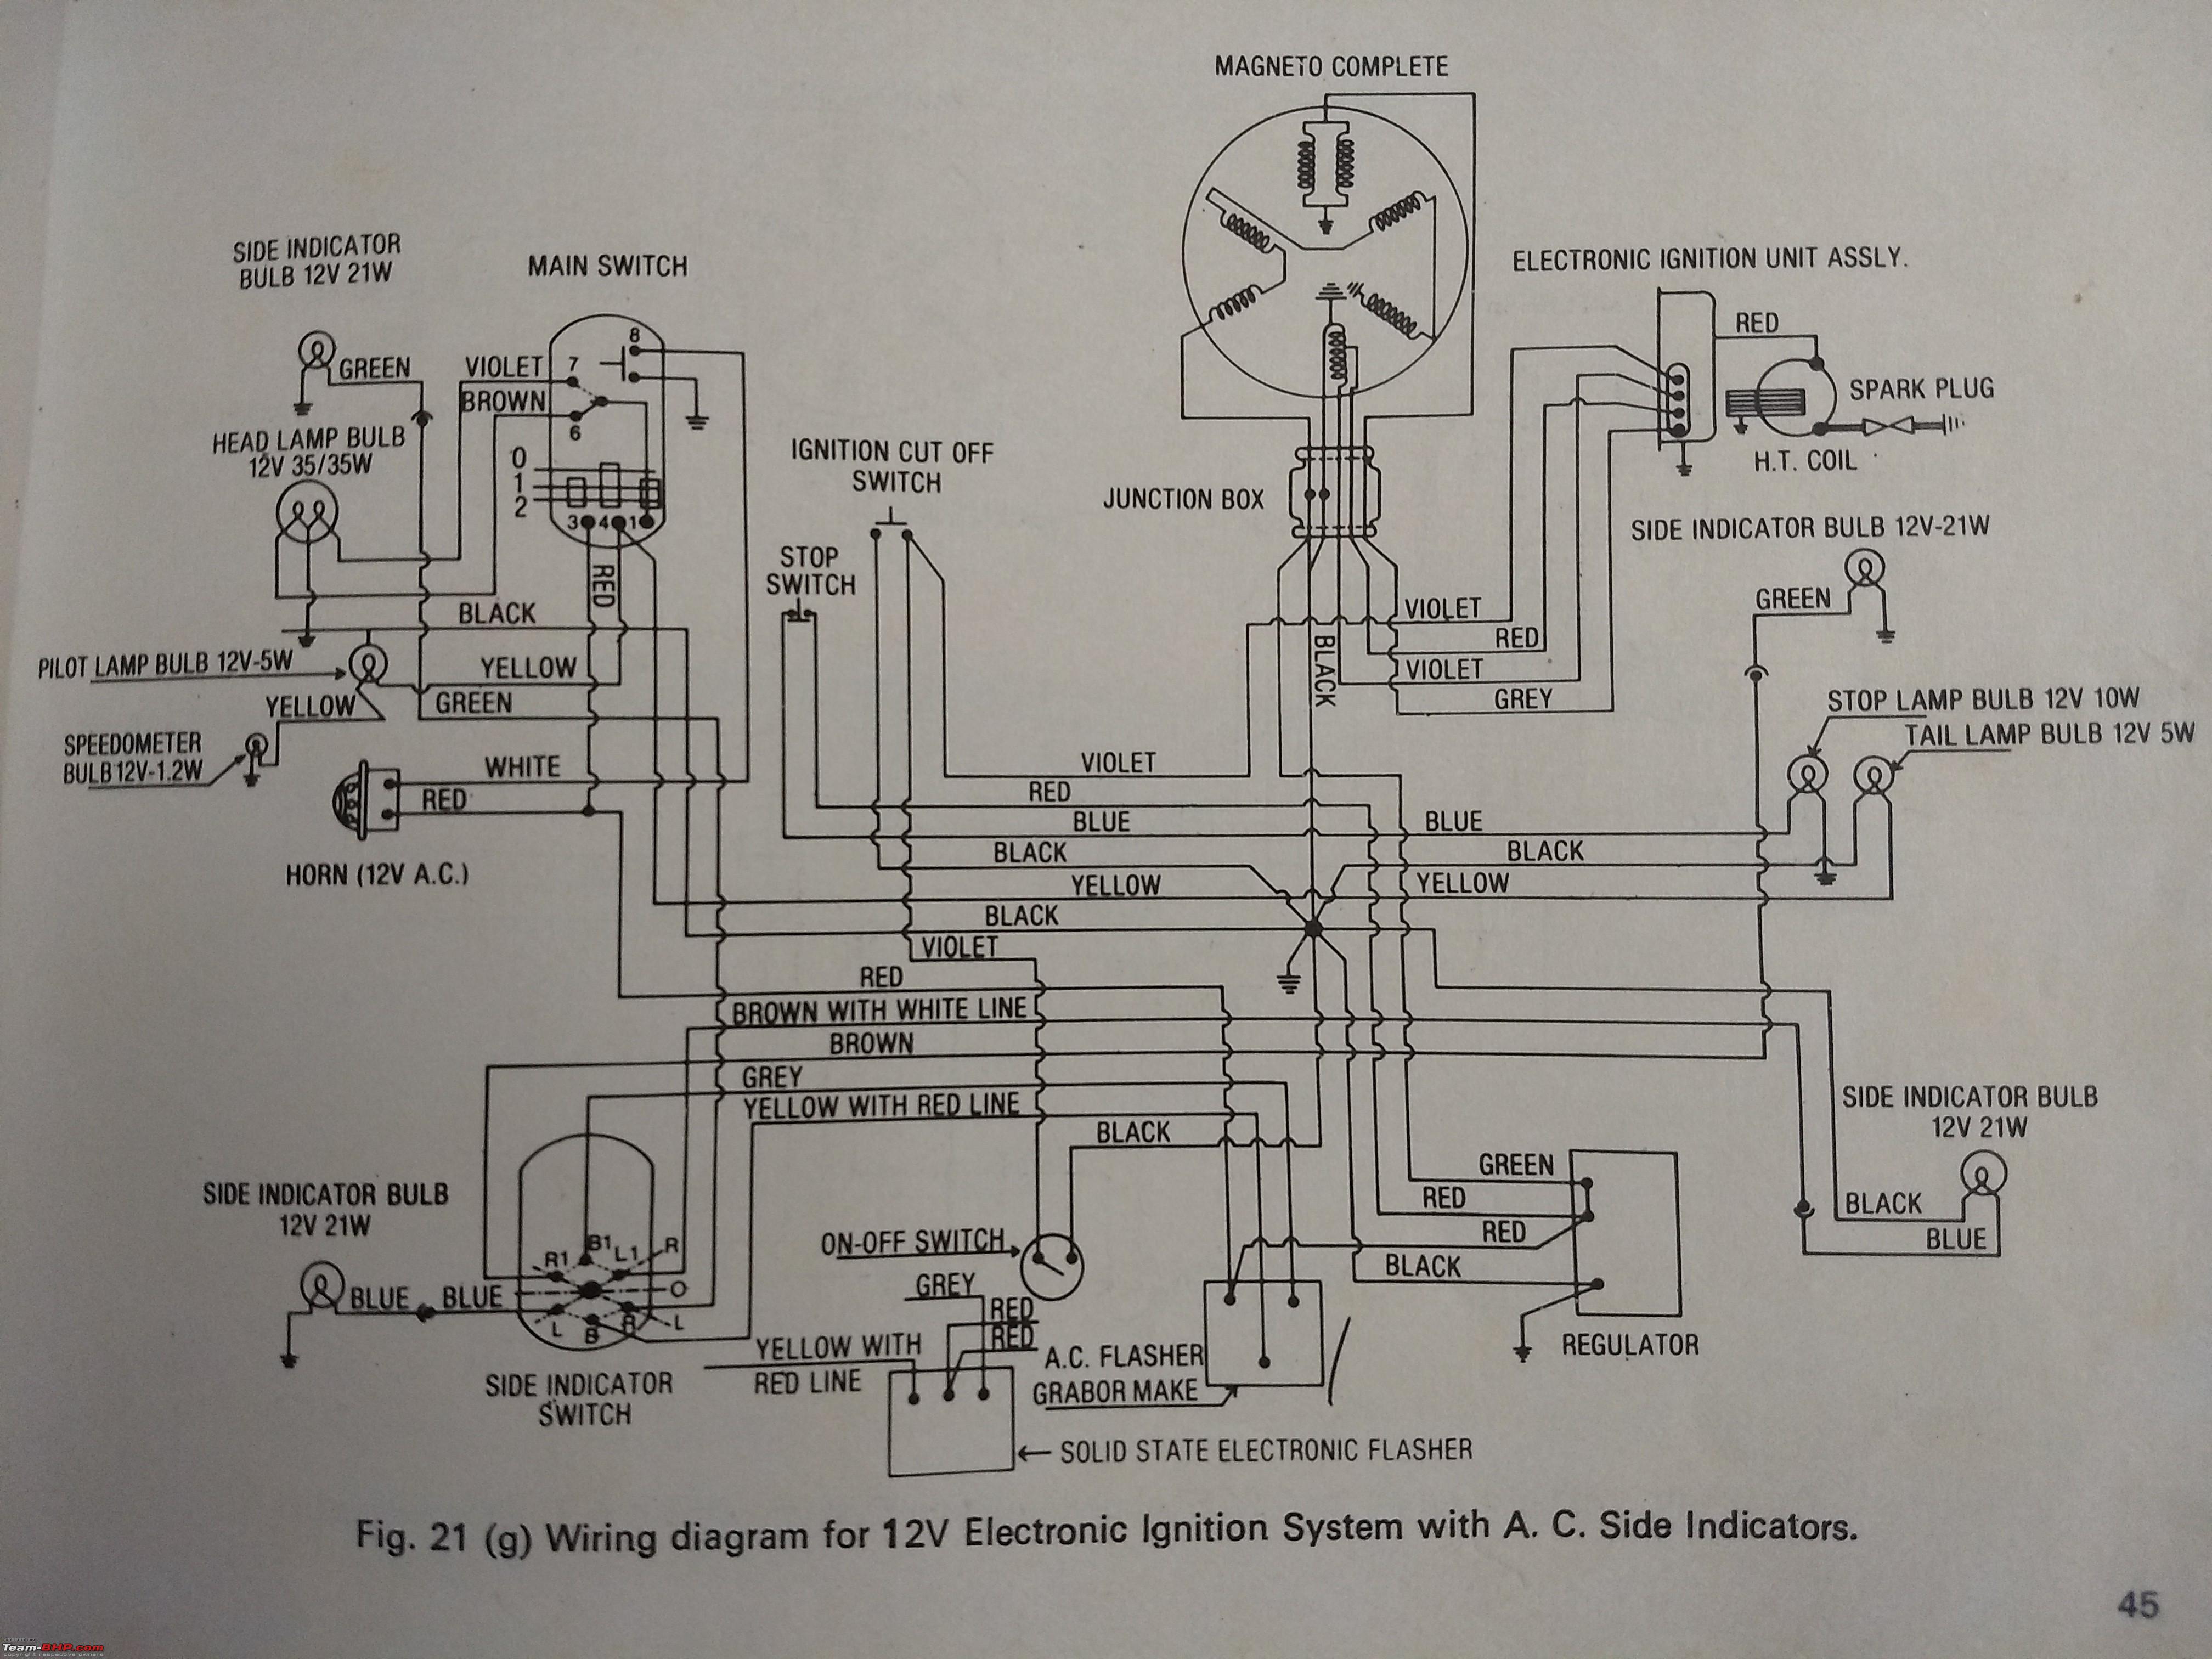 Wiring Diagrams Of Indian Two-wheelers